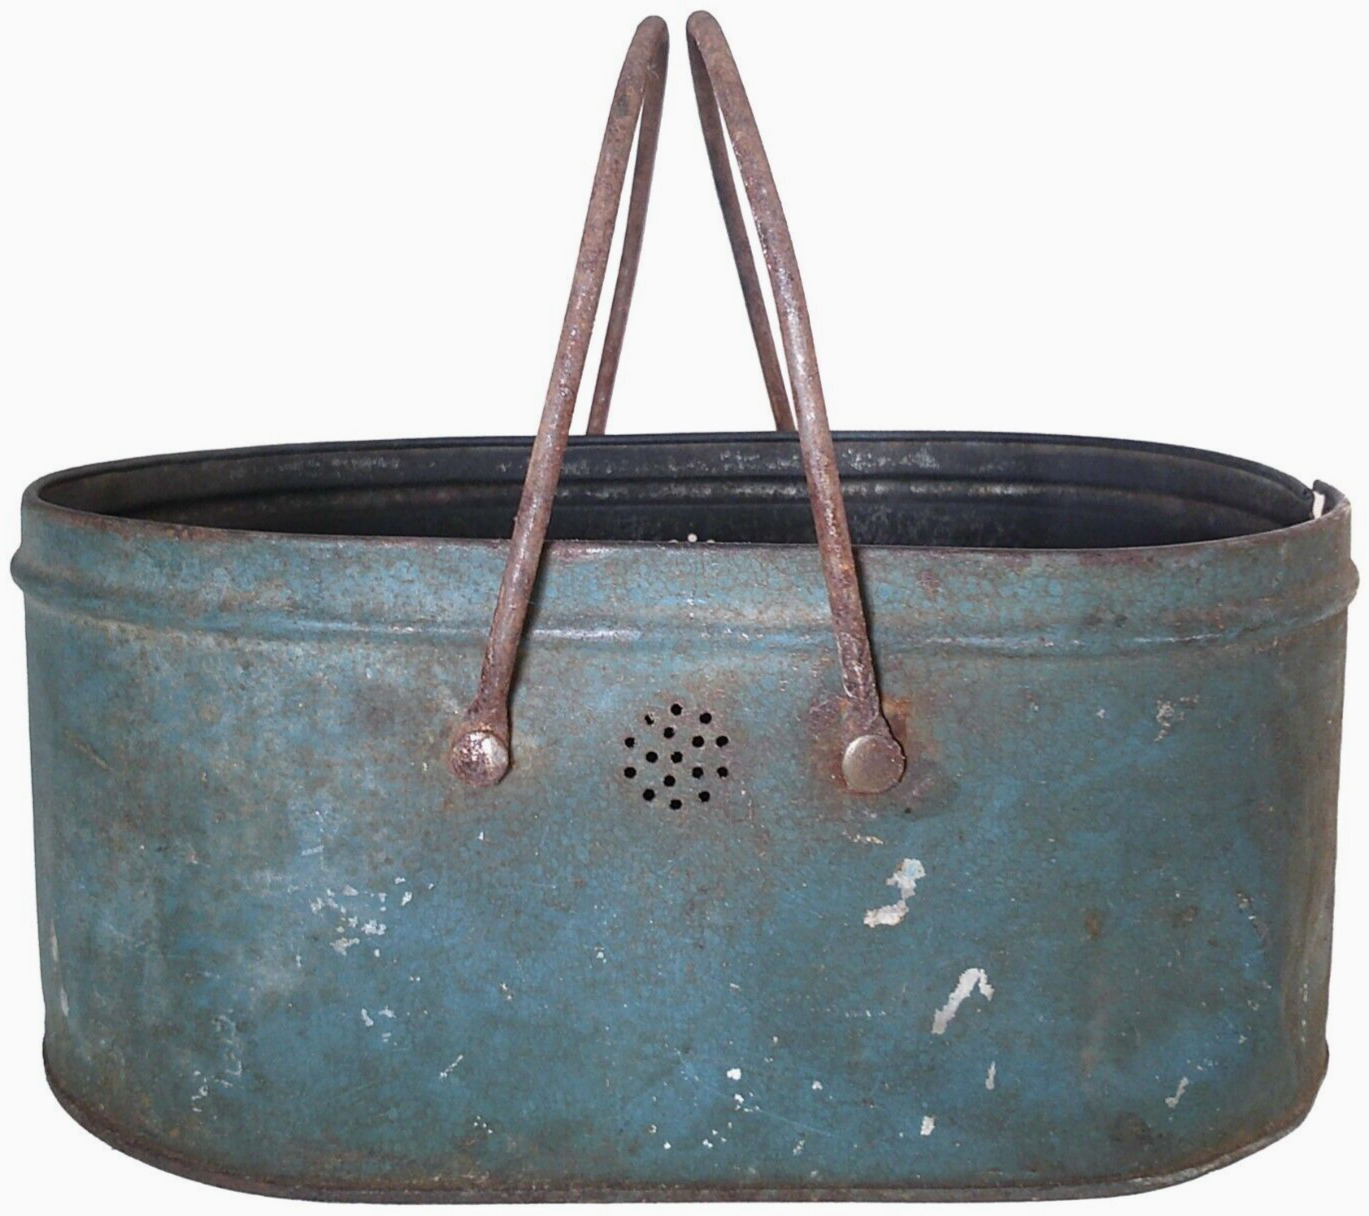 RARE MID-19TH C AMERICAN PRIMITIVE, ANTIQUE BLUE PAINTED, HANDLED TIN LUNCH PAIL